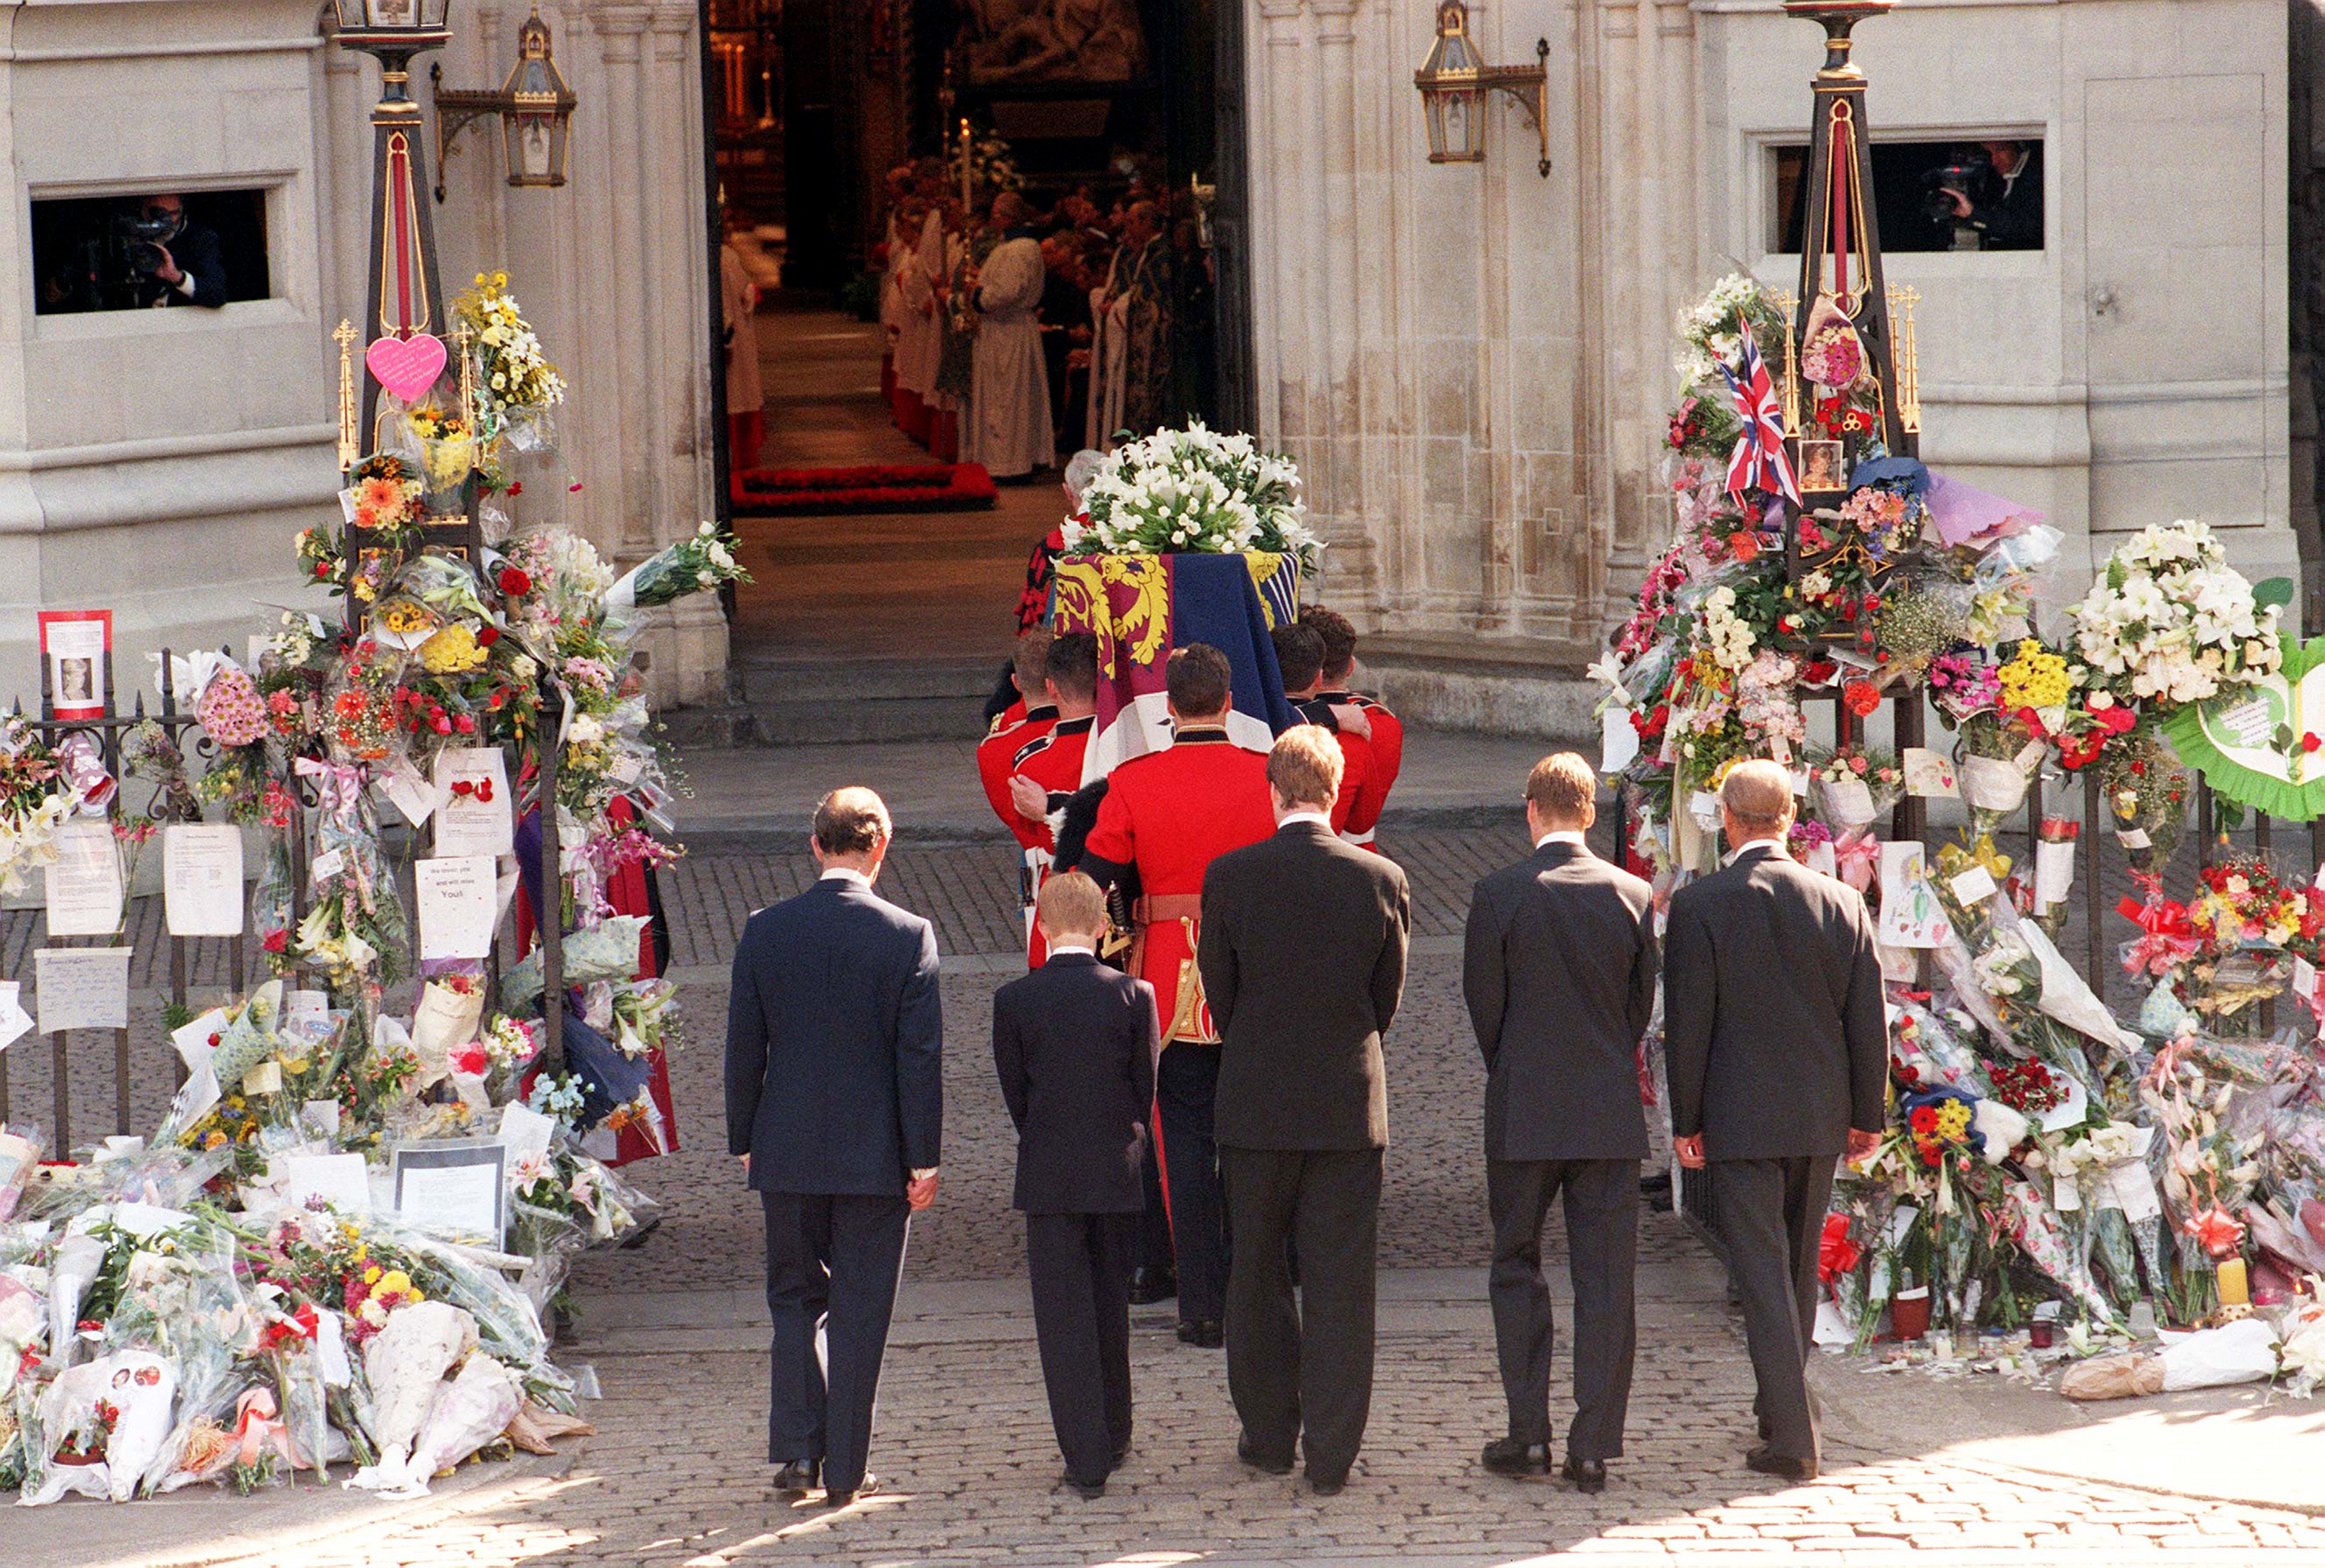 Princess Diana’s coffin being carried at her funeral in 1997